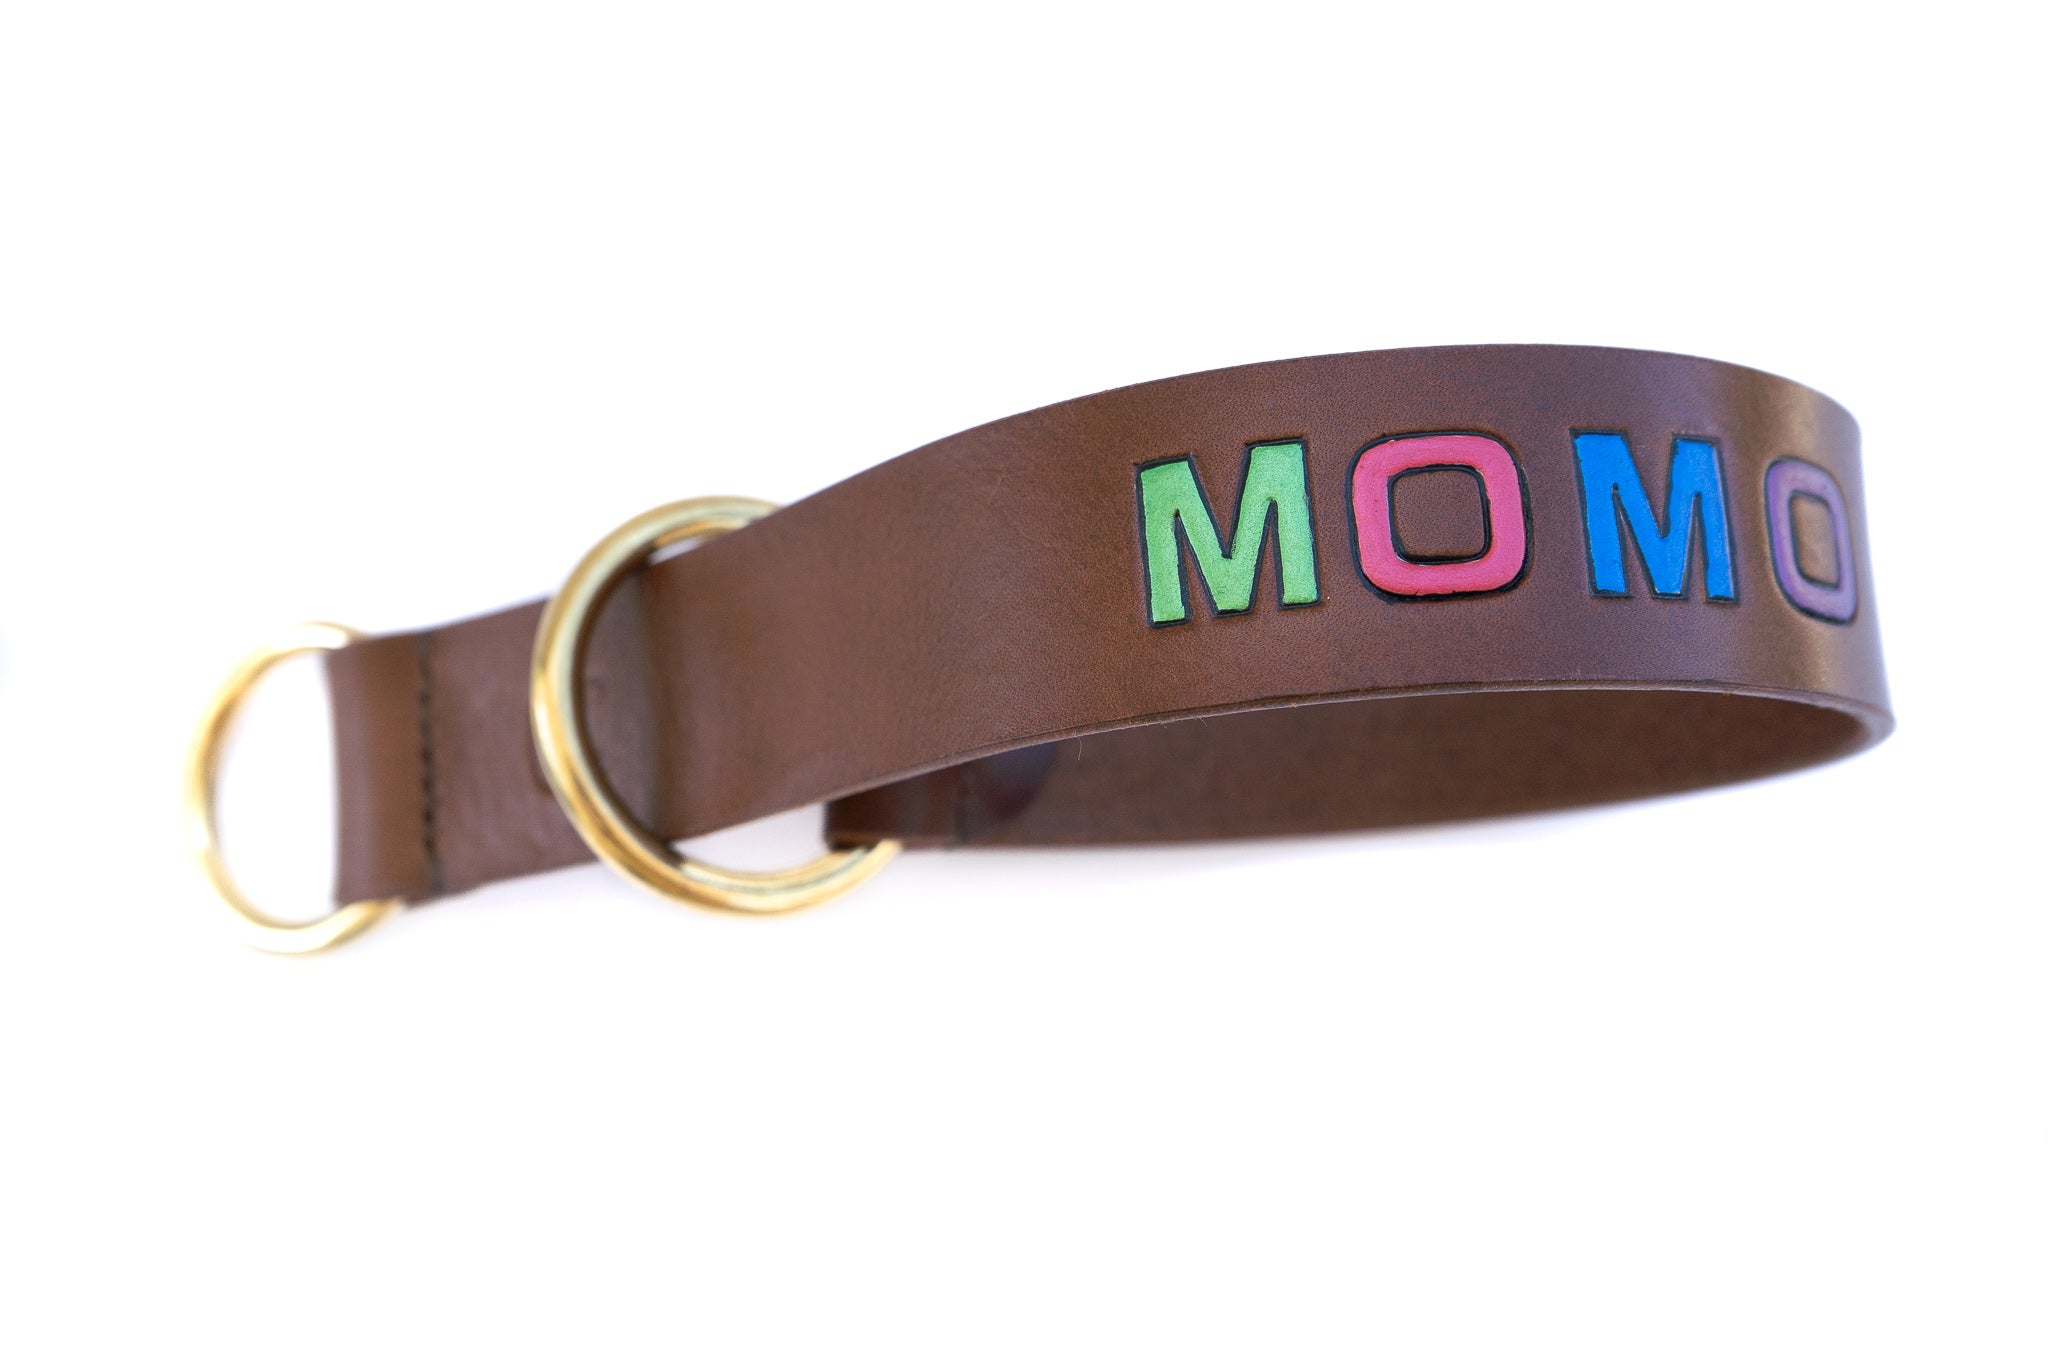 Handmade Dog Collar with Personalized Name Colorful